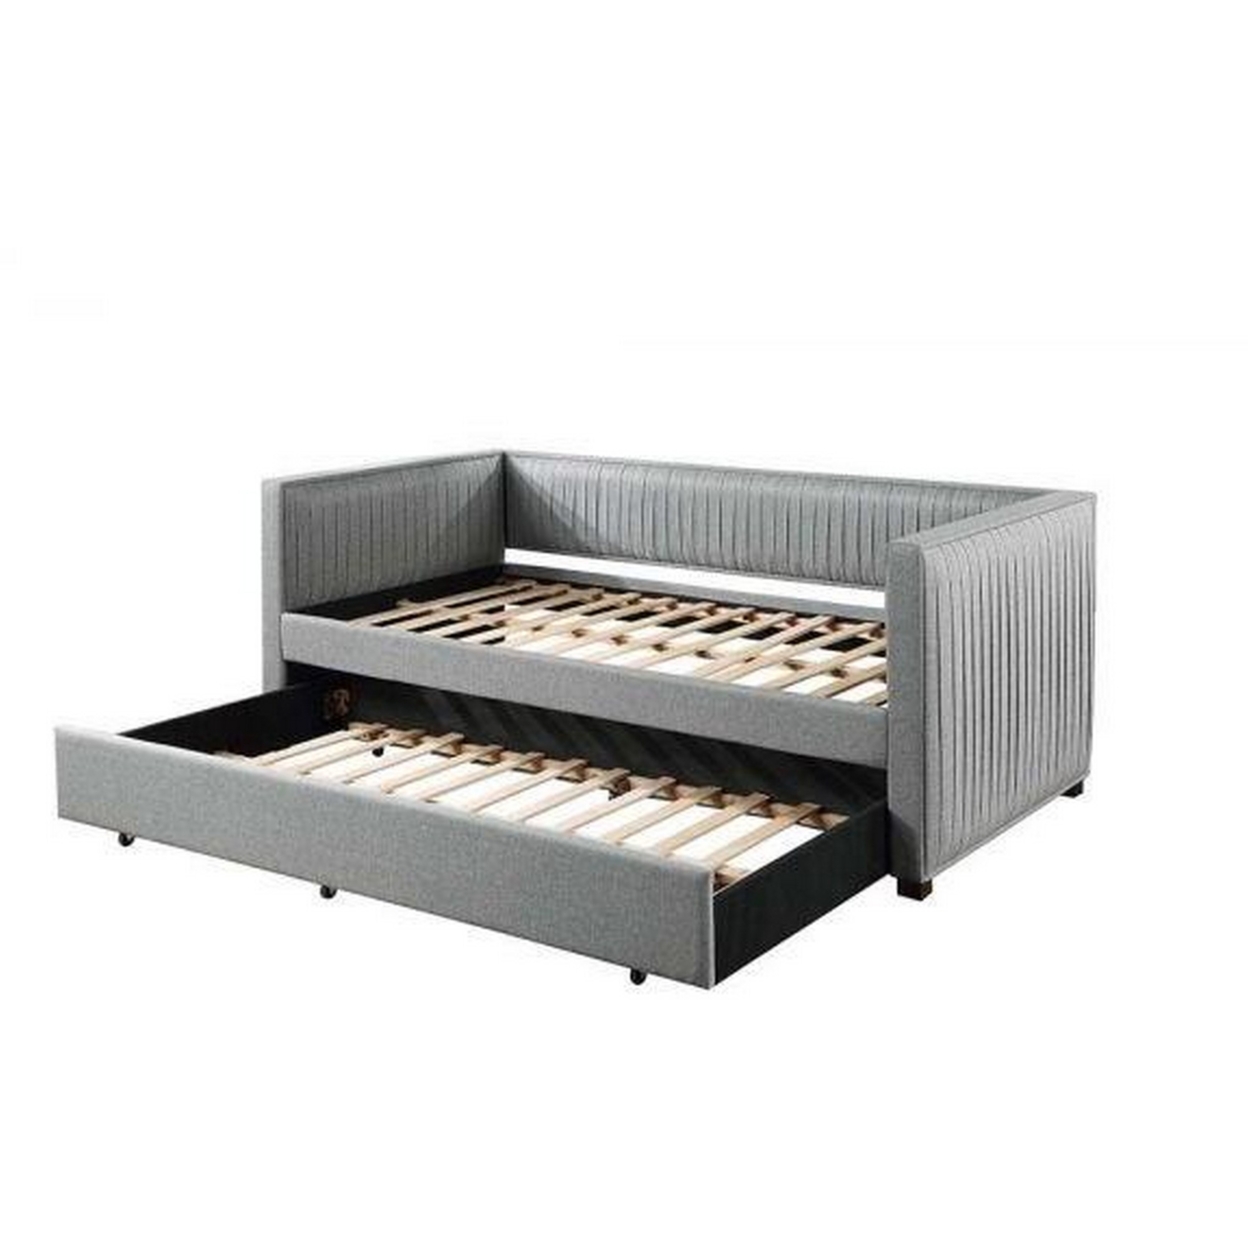 Classic Wood Daybed With Trundle, Upholstered, Pleated Design, Gray Fabric- Saltoro Sherpi